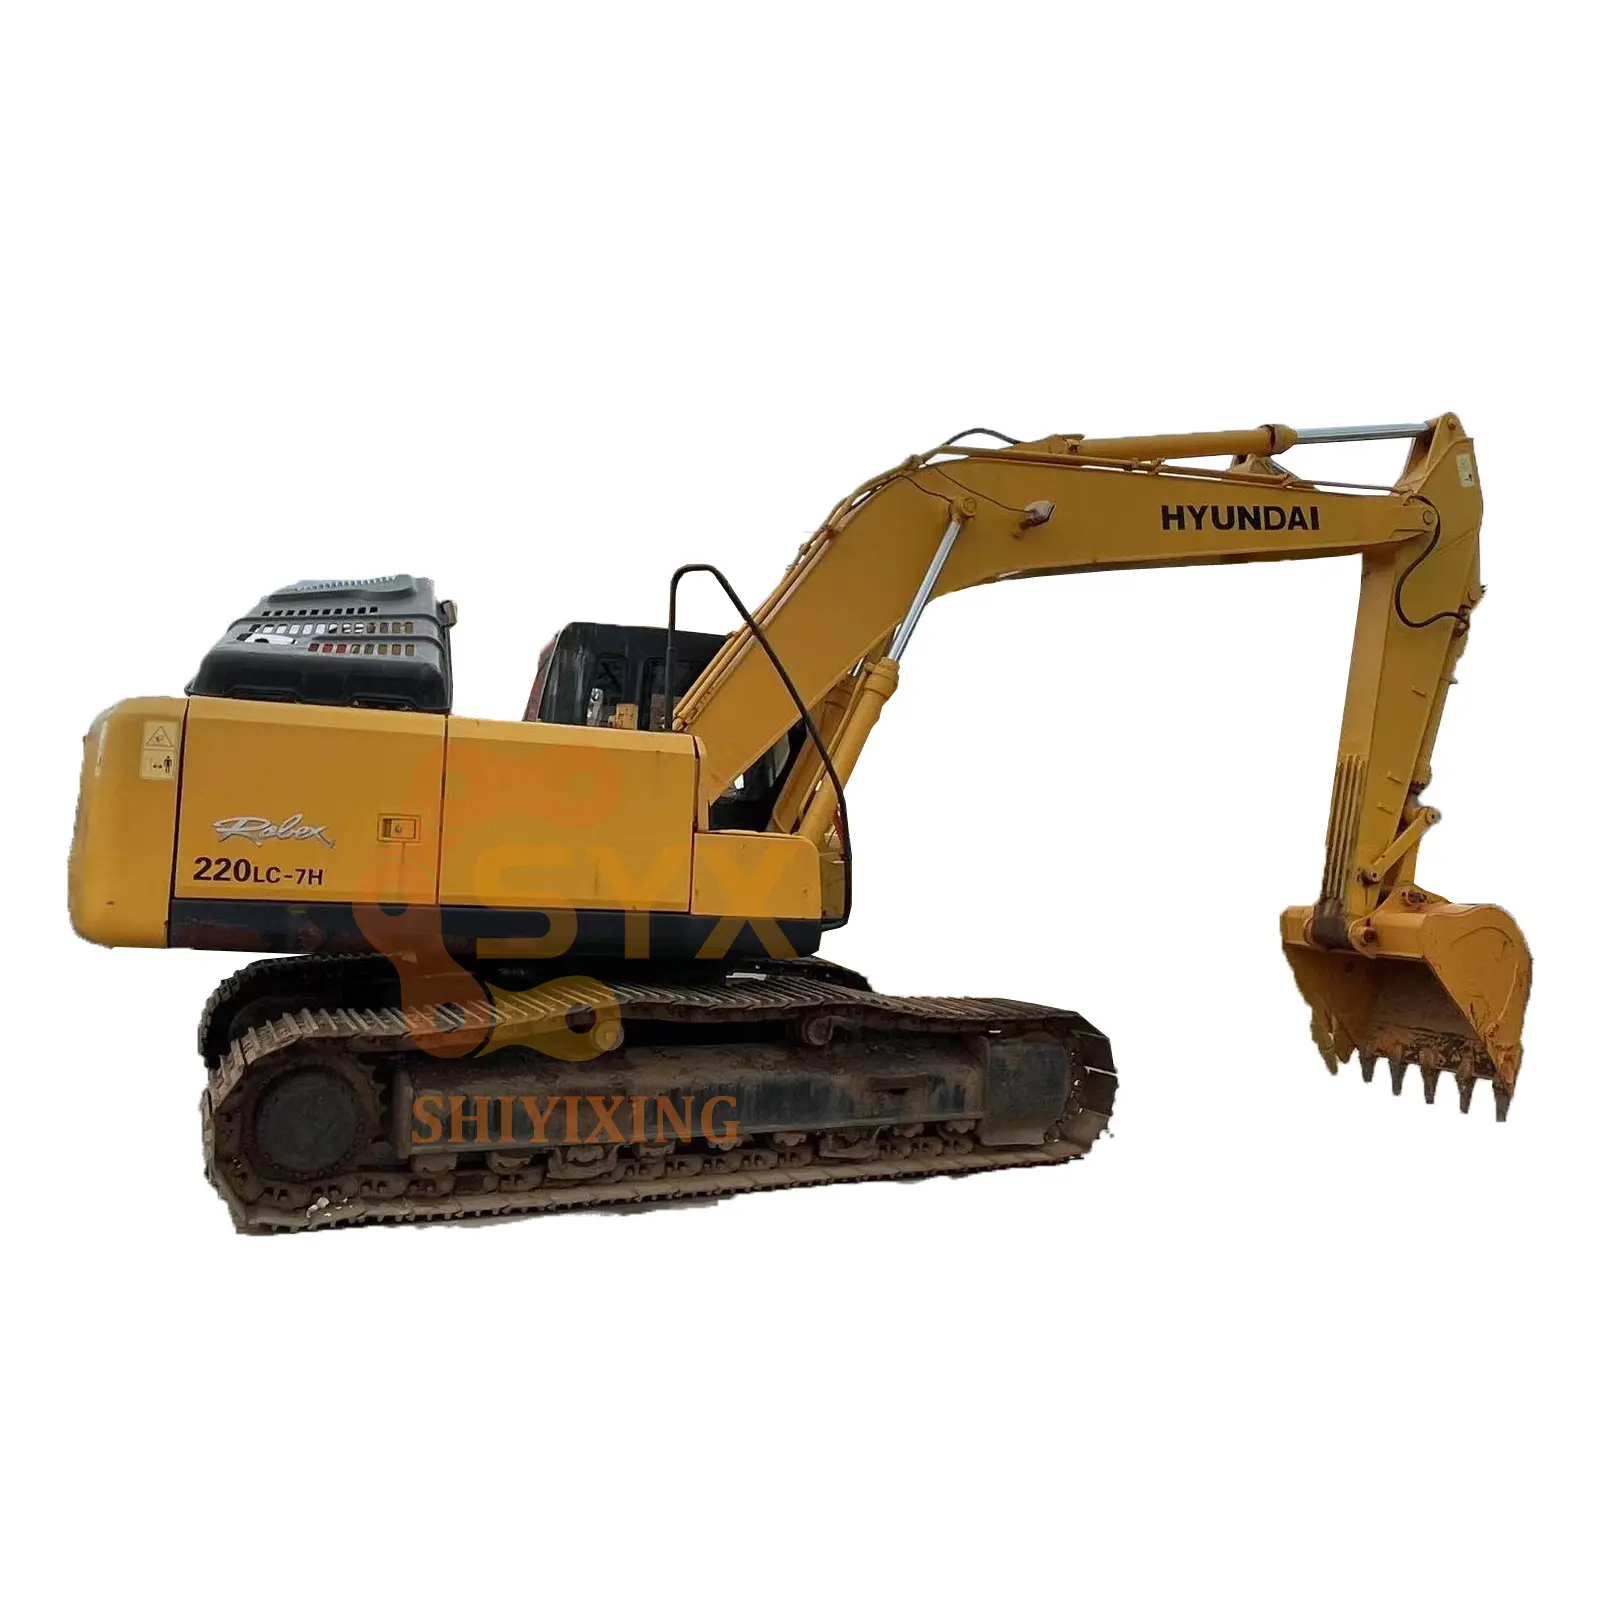 Hyundai 225-7 used excavator construction digger machine second hand hydraulic excavator 22 tons in stock